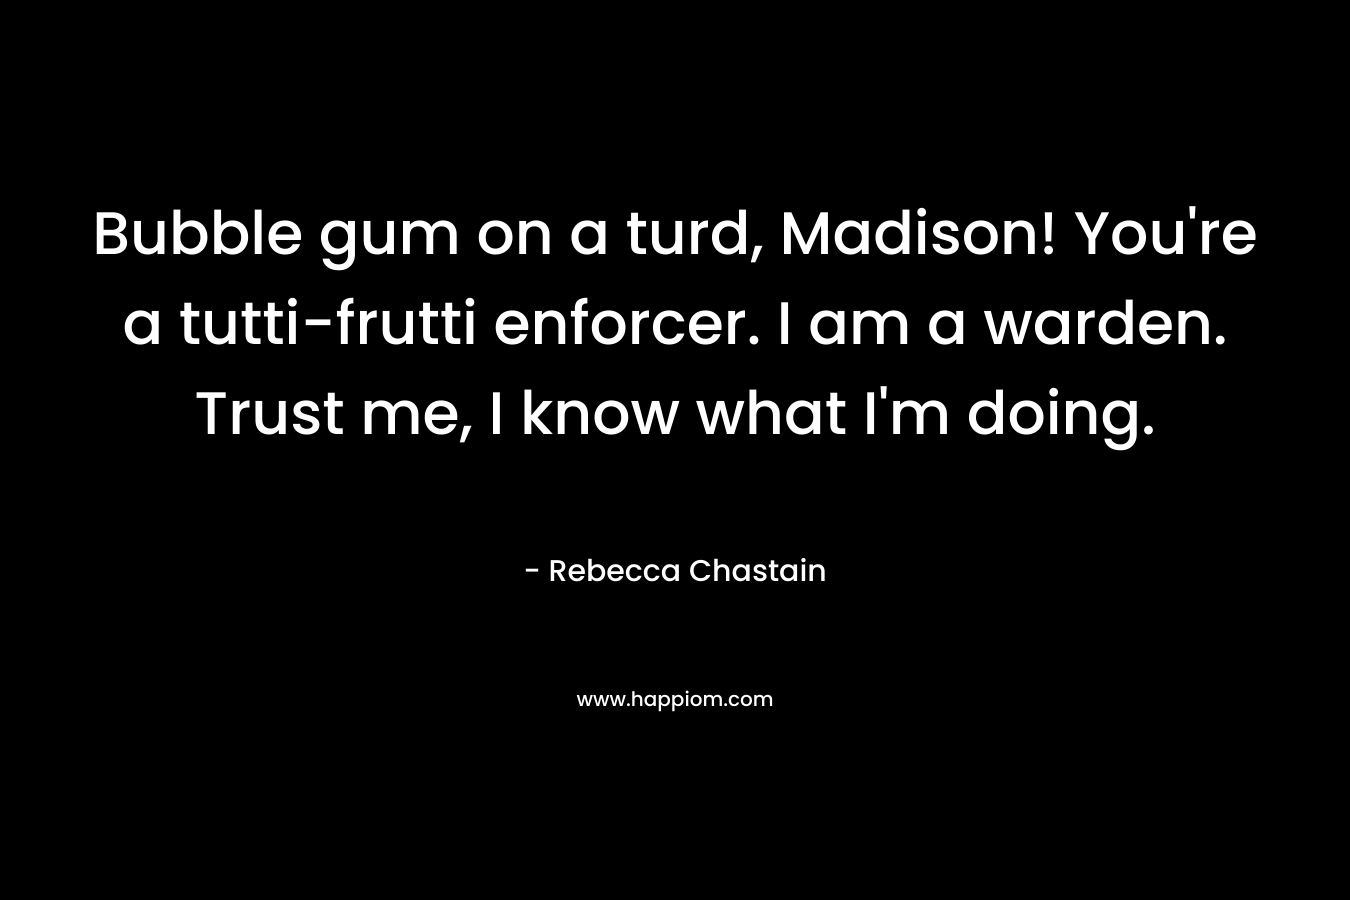 Bubble gum on a turd, Madison! You’re a tutti-frutti enforcer. I am a warden. Trust me, I know what I’m doing. – Rebecca Chastain